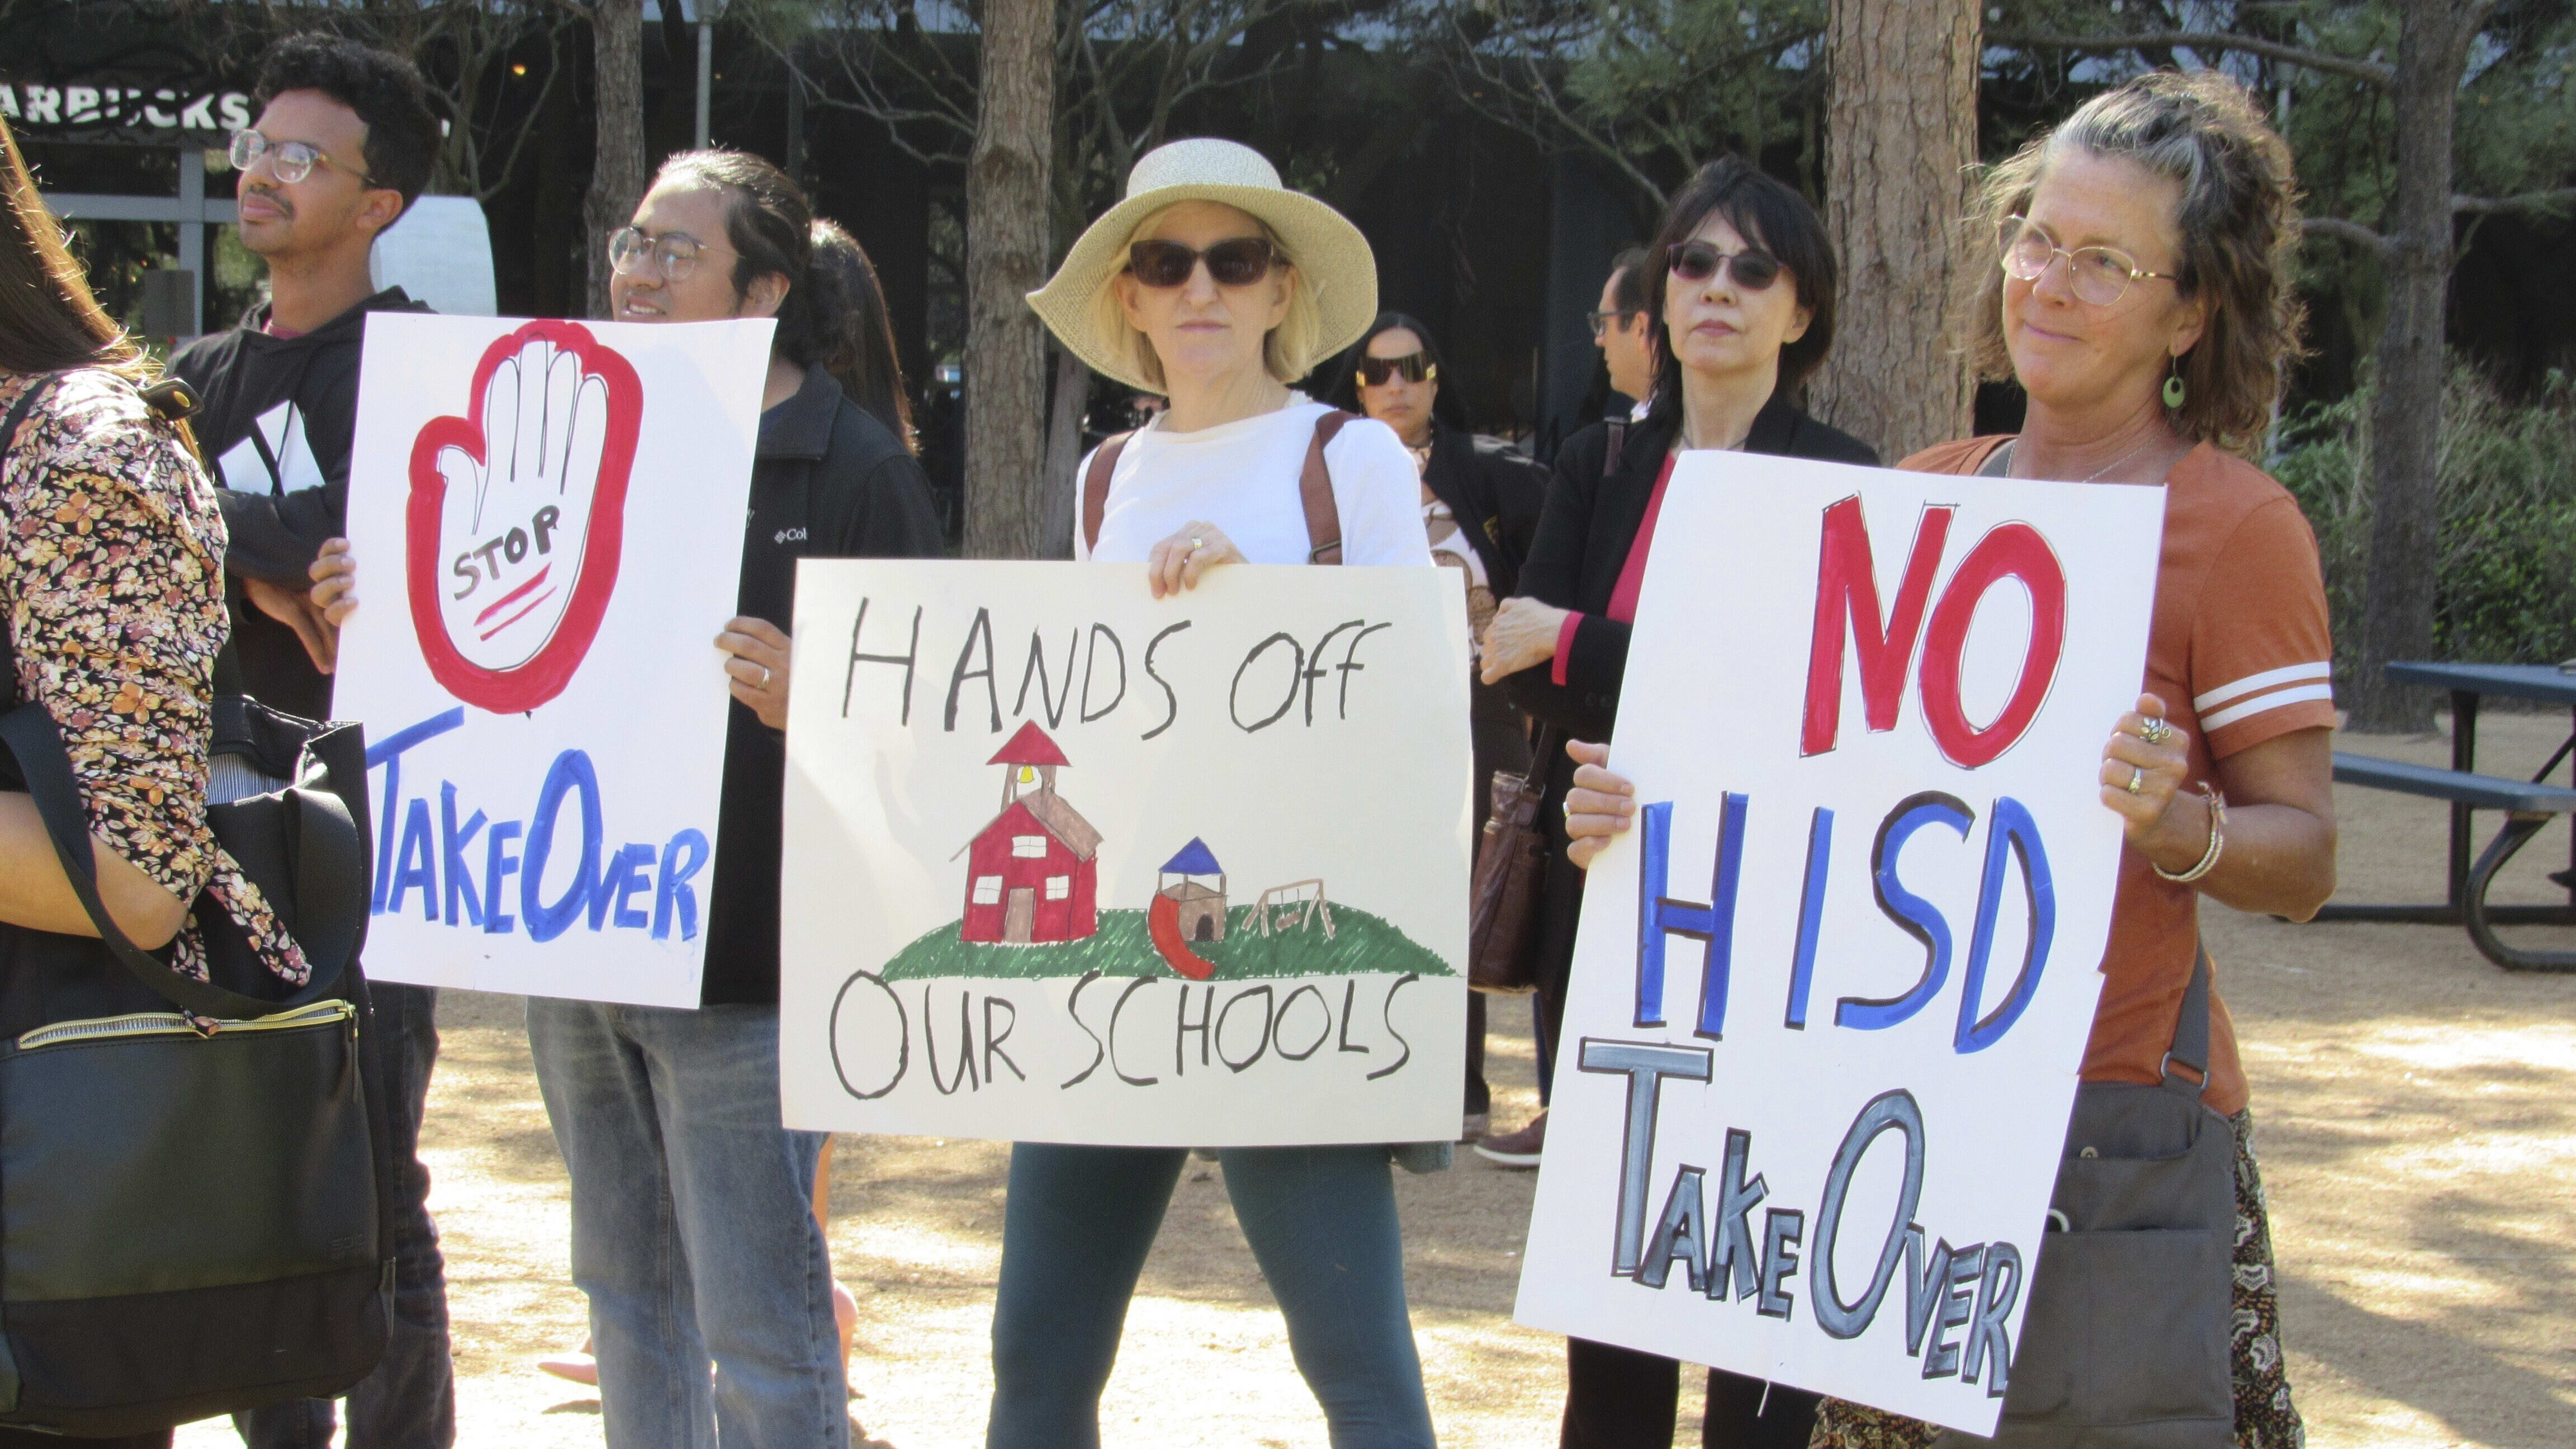 People protesting the takeover of the Houston Independent School District.